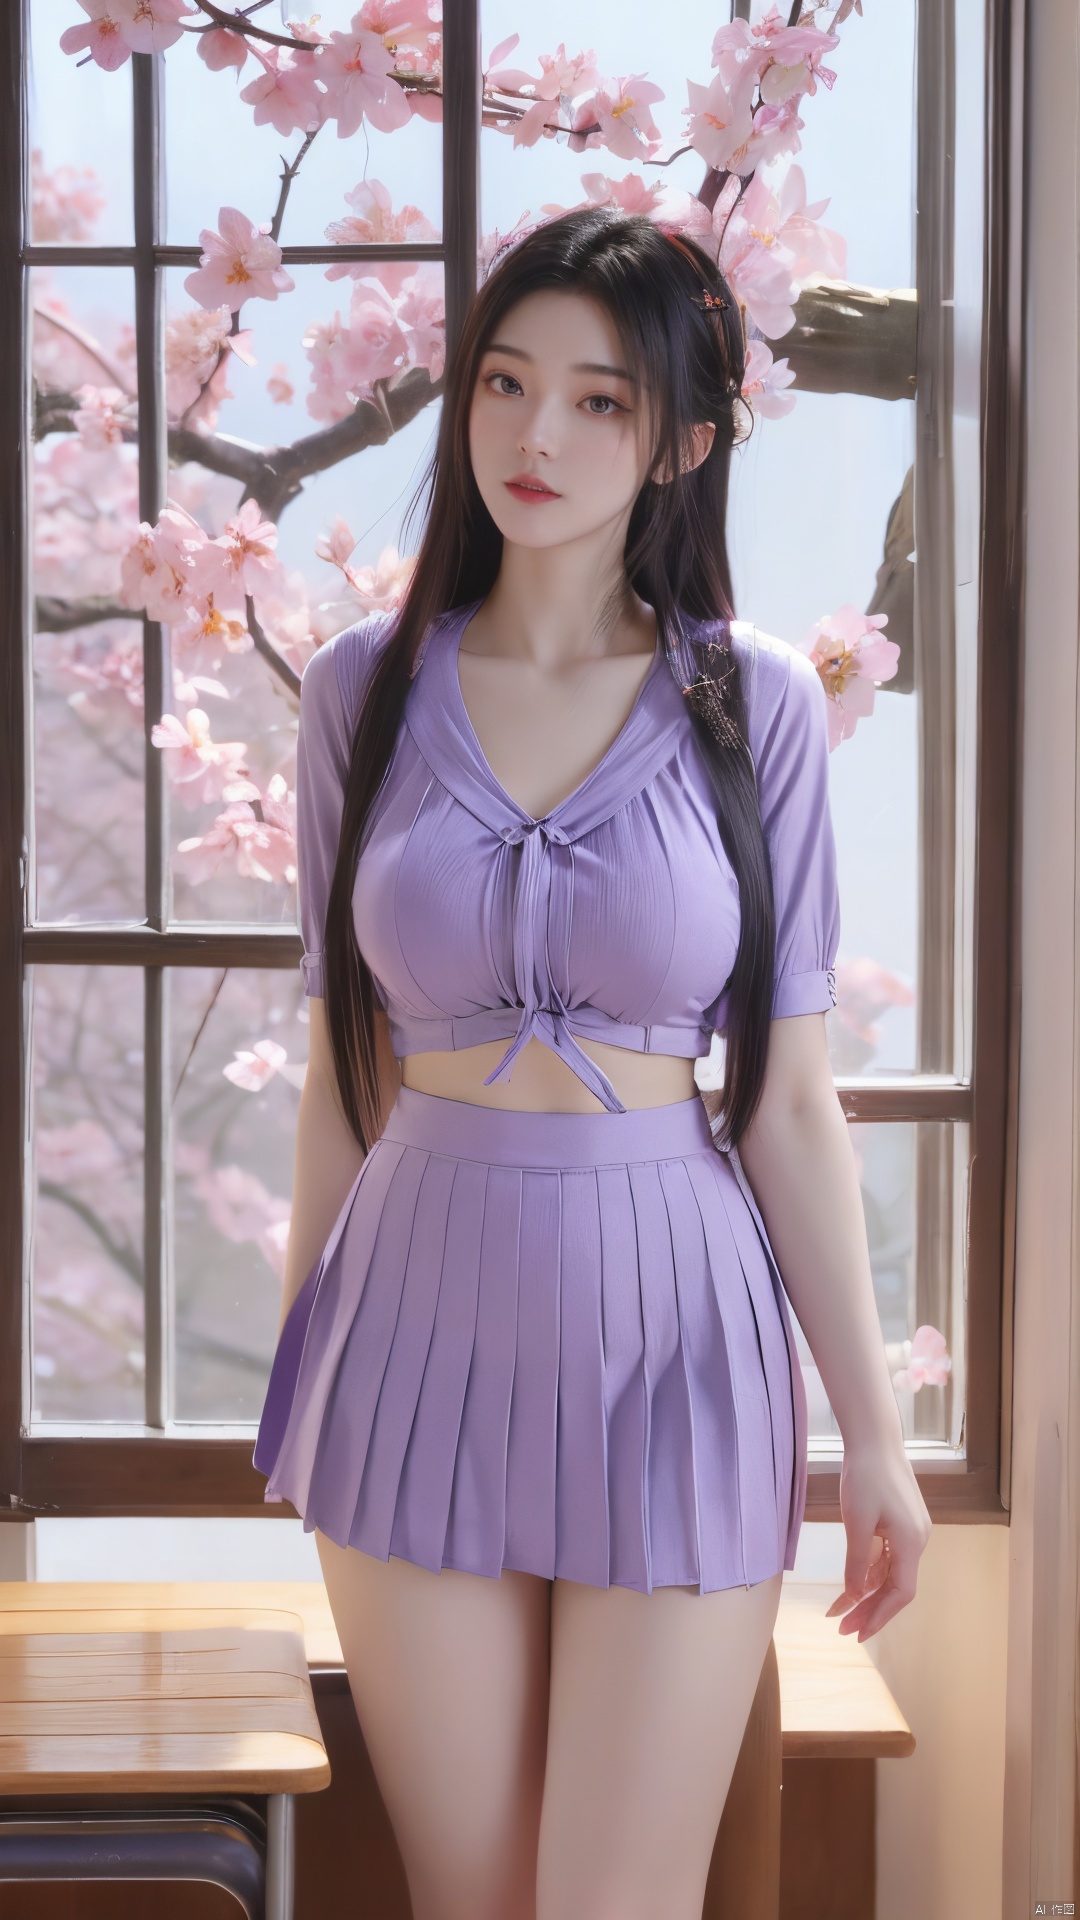  Best quality,masterpiece,1girl,(light purple business shirt:1.2), (huge breasts:1.59),(pink Tie:1.1), (Exposed thighs:1.3), (mini skirt:1.3), (pleated skirt:1.3),1 girl,(Cherry blossoms in front of the classroom window:1.39),(huge breasts:1.68),